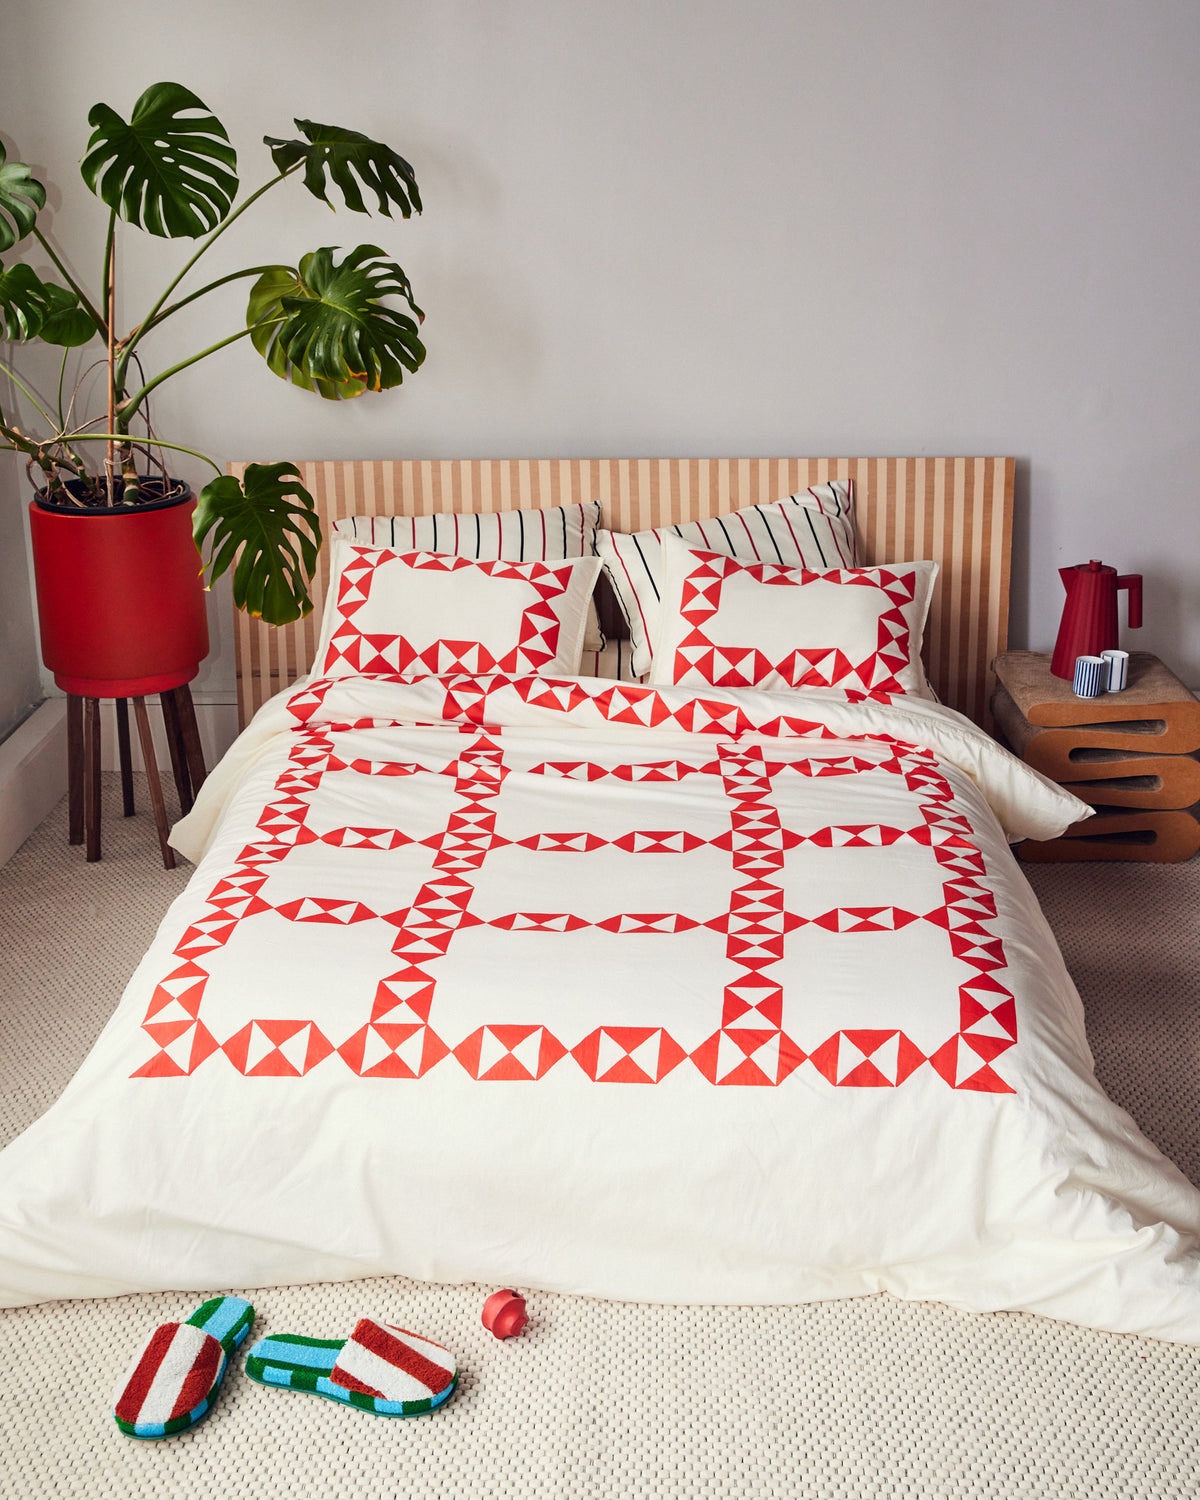 Dusen Dusen Hourglass Duvet Set in bright red and white hourglass pattern, includes a duvet cover plus set of 2 shams (1 for Twin). 